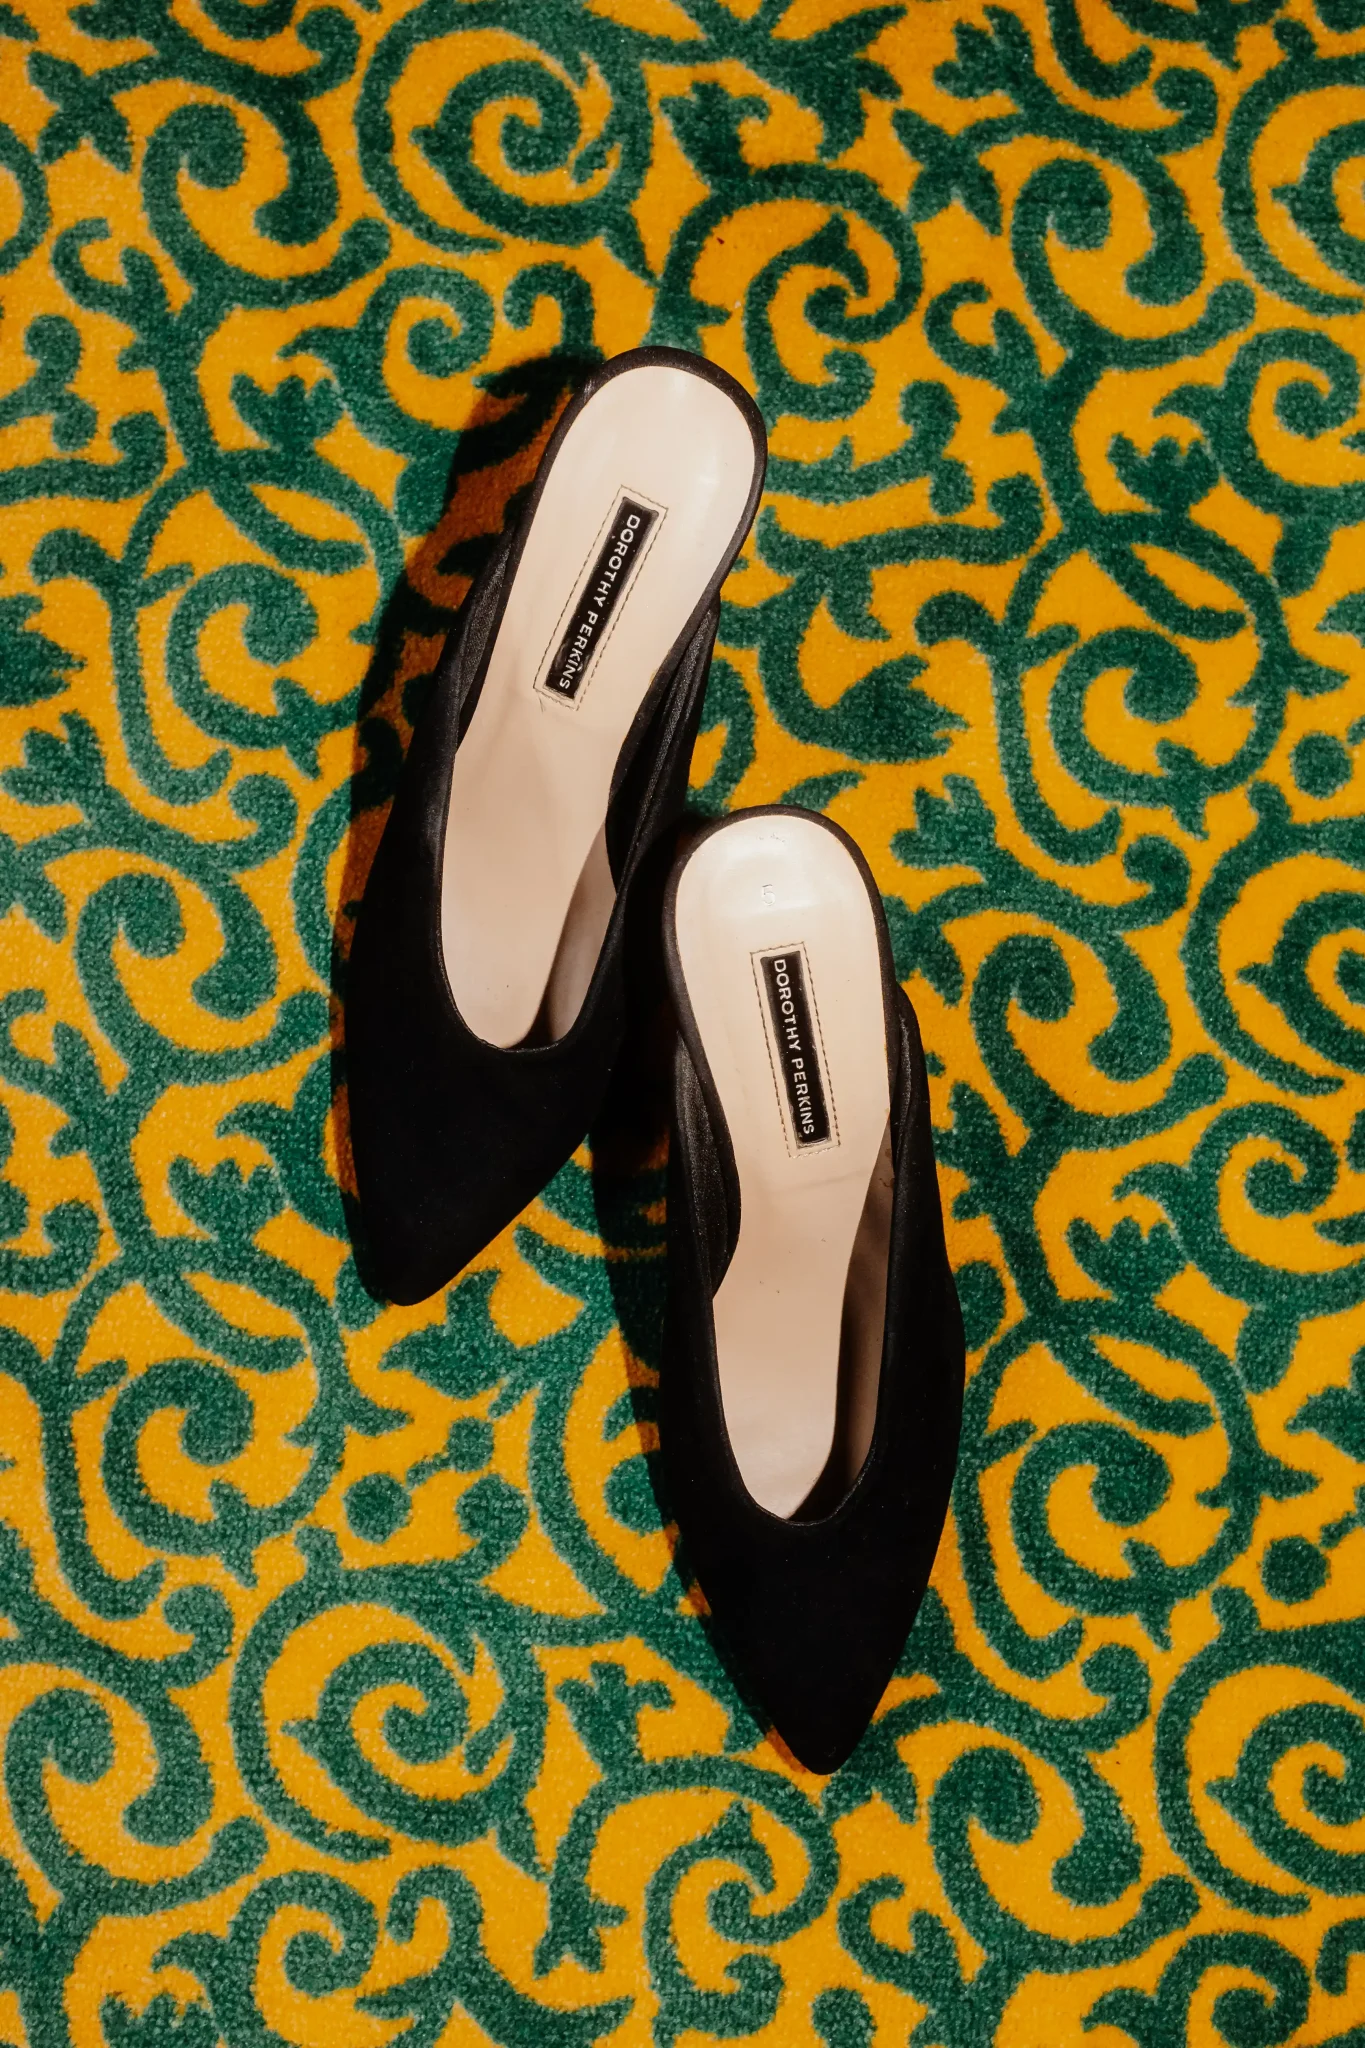 A pair of black shoes on a yellow and green carpet.